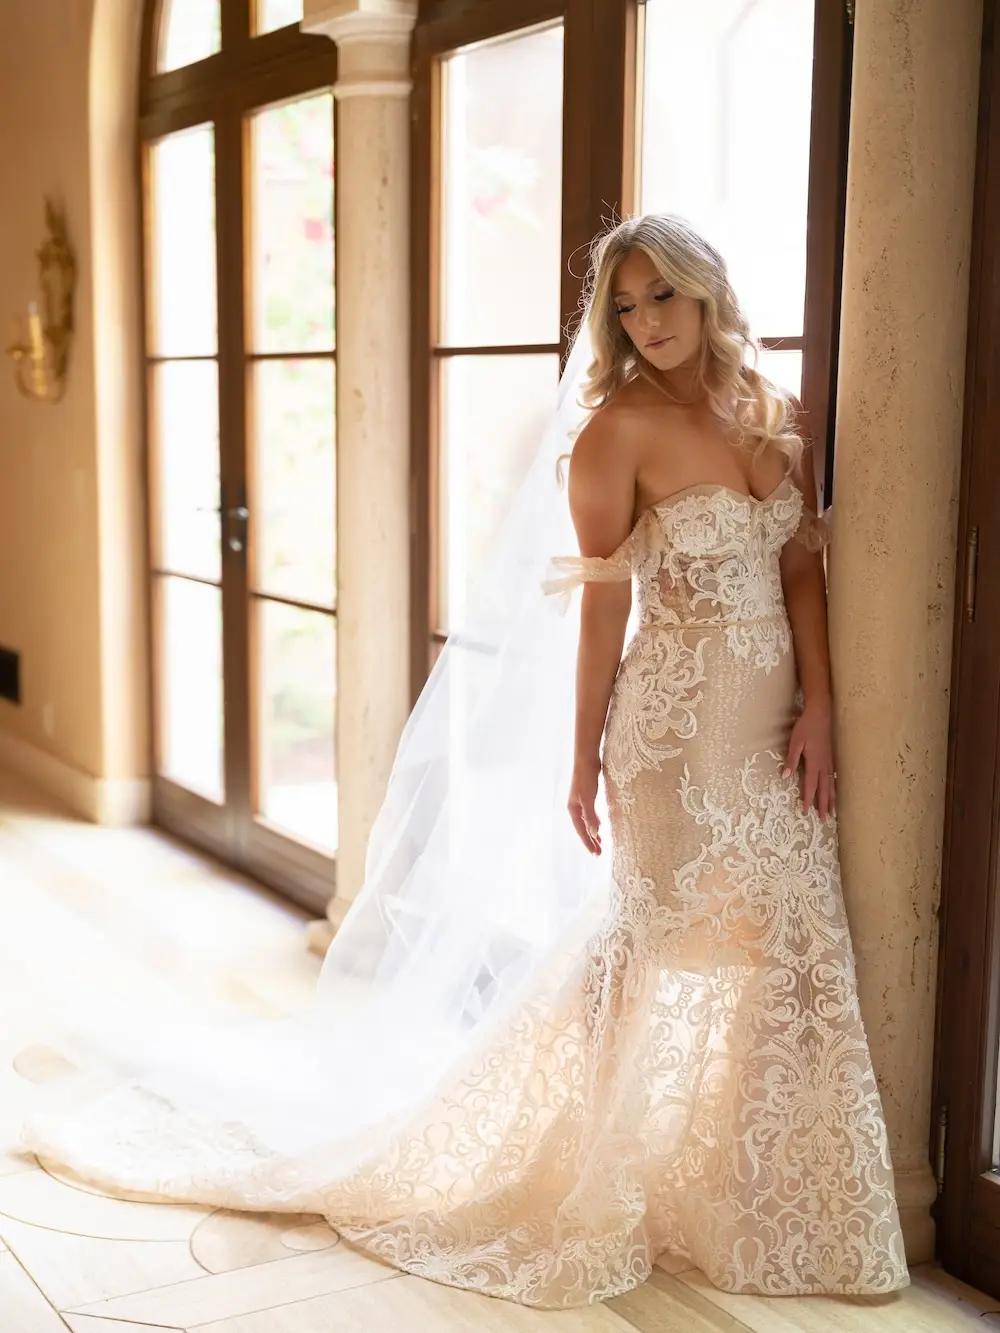 Rebecca Wears Fitted Lace Wedding Dress with Off Shoulders Straps Image